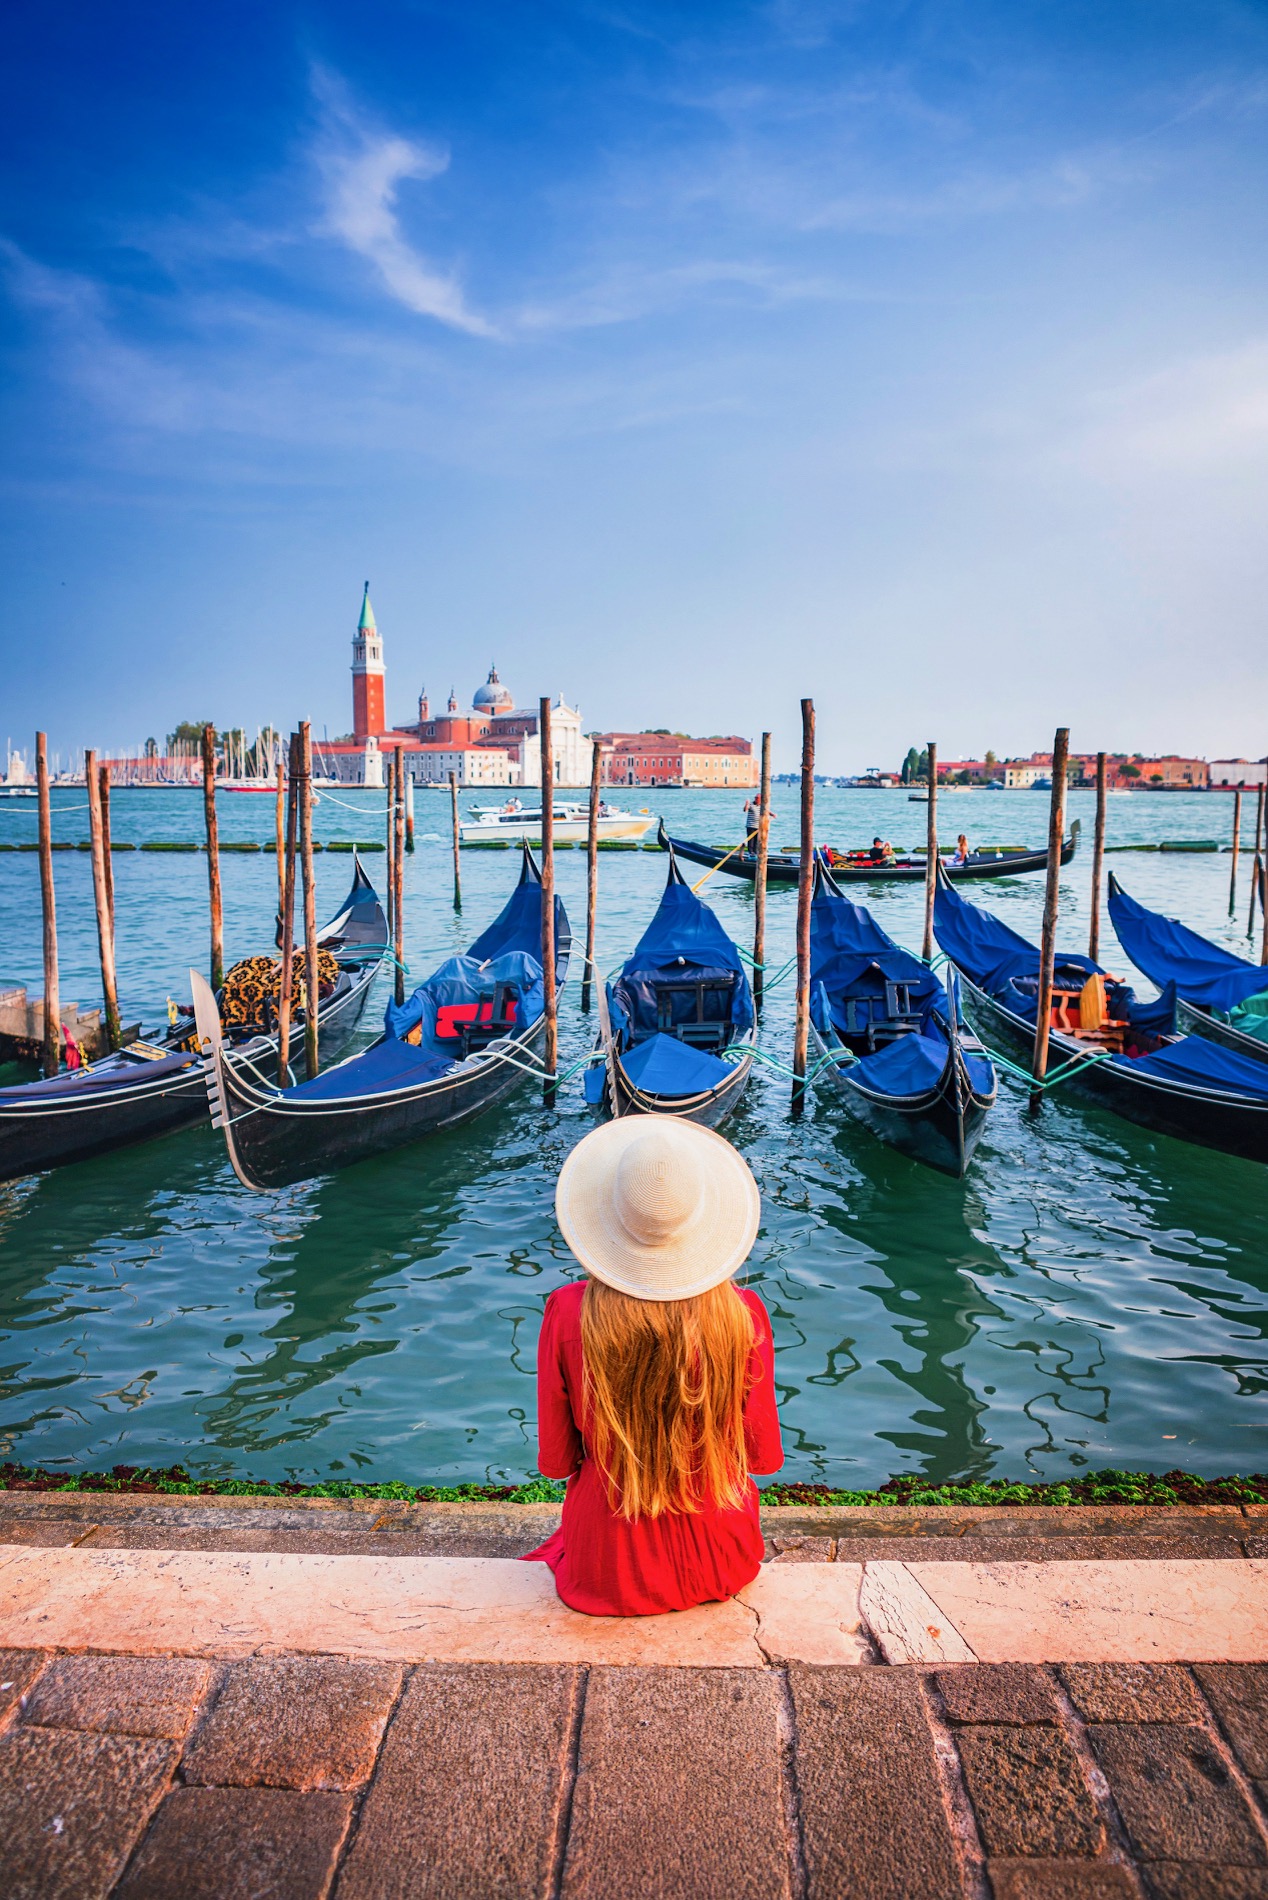 Woman in red and sun hat sits on the edge of the lagoon near docked gondolas in Venice.